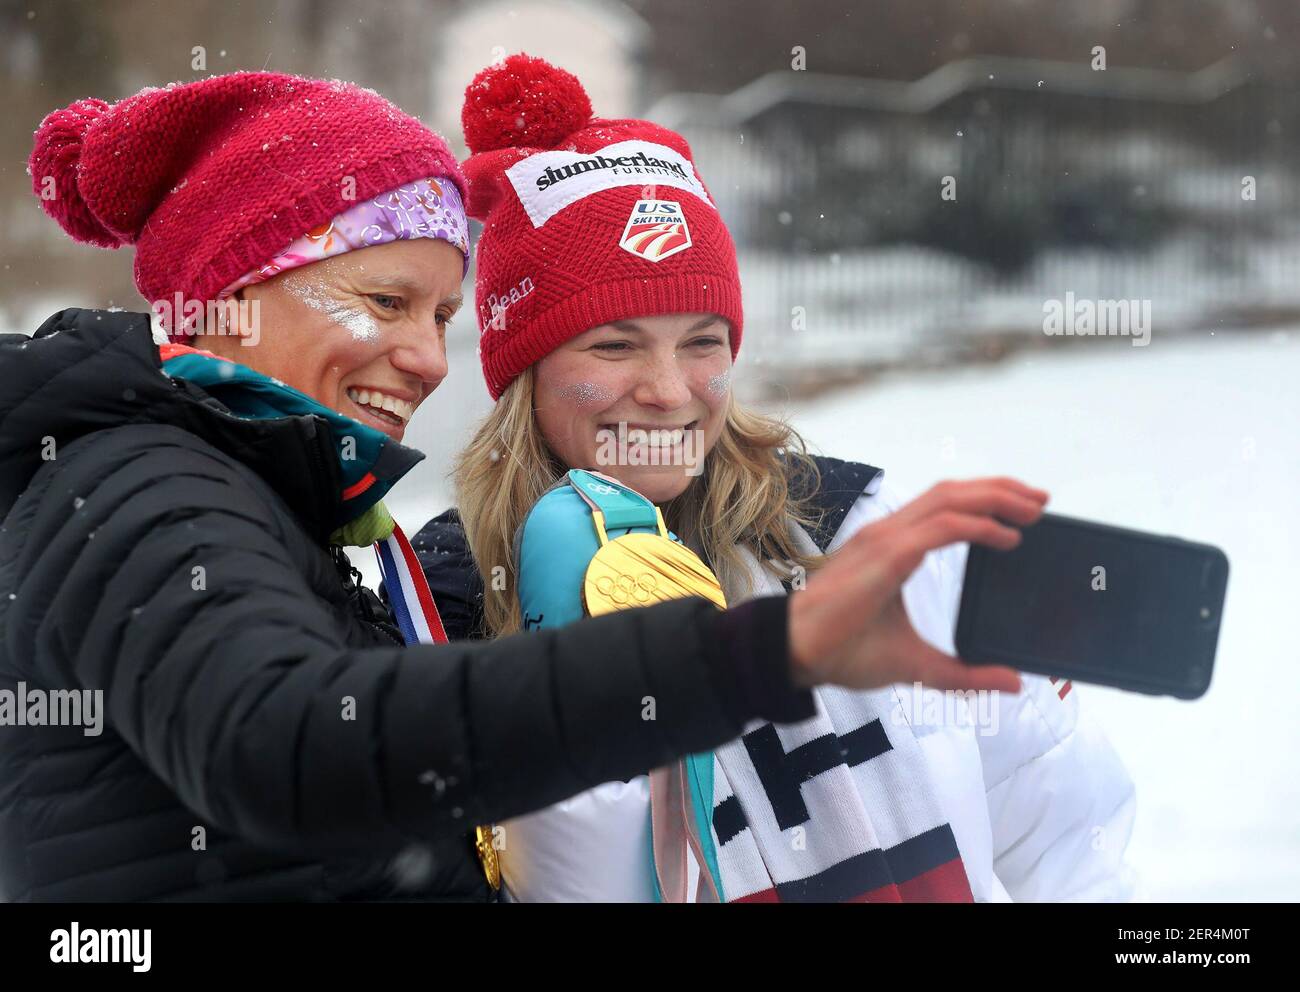 Jessie Diggins, Team USA Olympic gold medalist cross country skier, poses for a selfie with Kris Hansen, her high school coach, as hundreds brave snowy, blustery weather to honor Diggins with a parade on Saturday, April 14, 2018, in Stillwater, Minn. (Photo by David Joles/Minneapolis Star Tribune/TNS/Sipa USA) Stock Photo